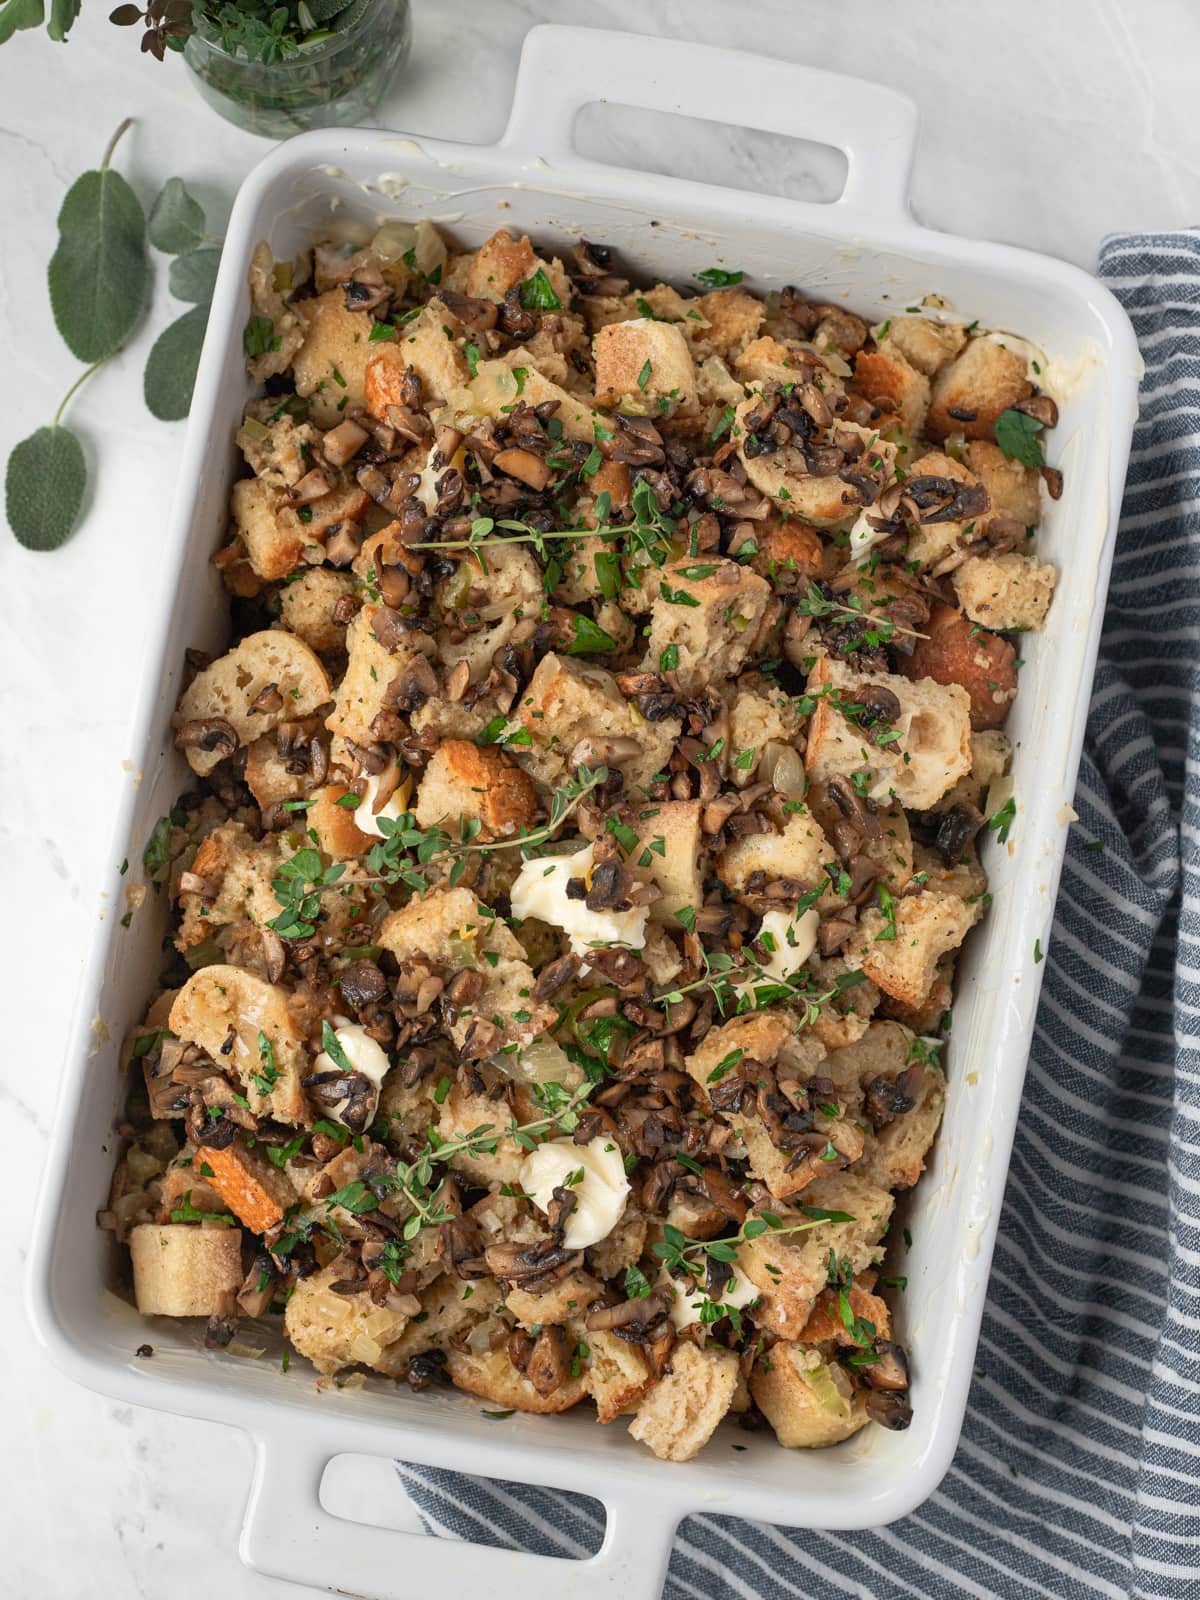 Traditional vegetarian stuffing in a casserole dish.